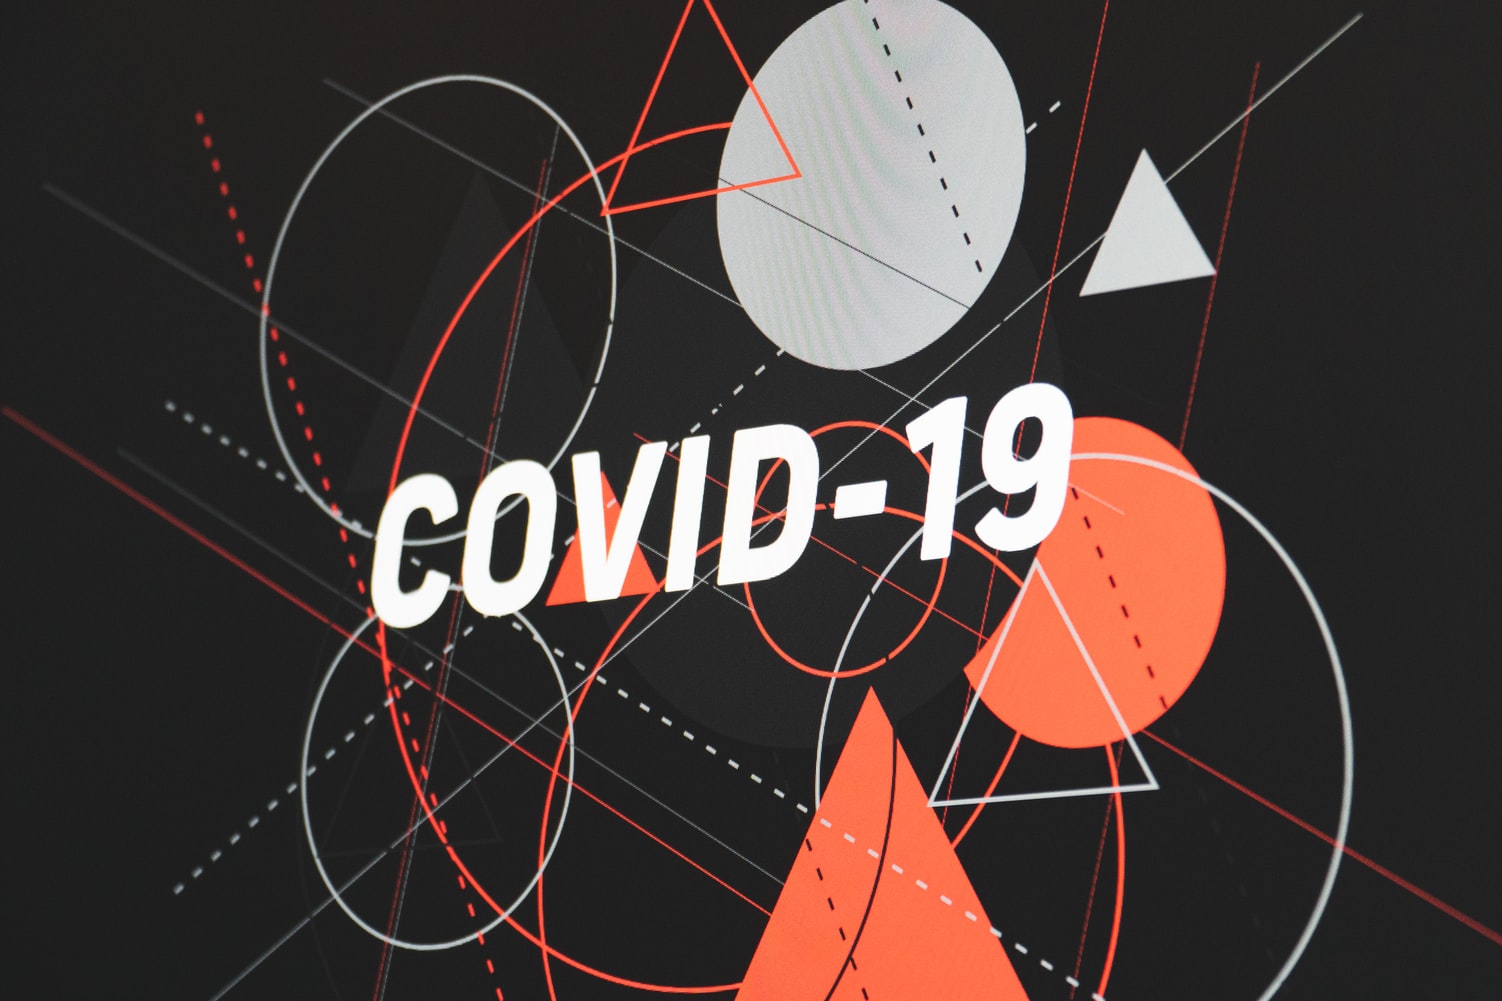 Effects of COVID-19